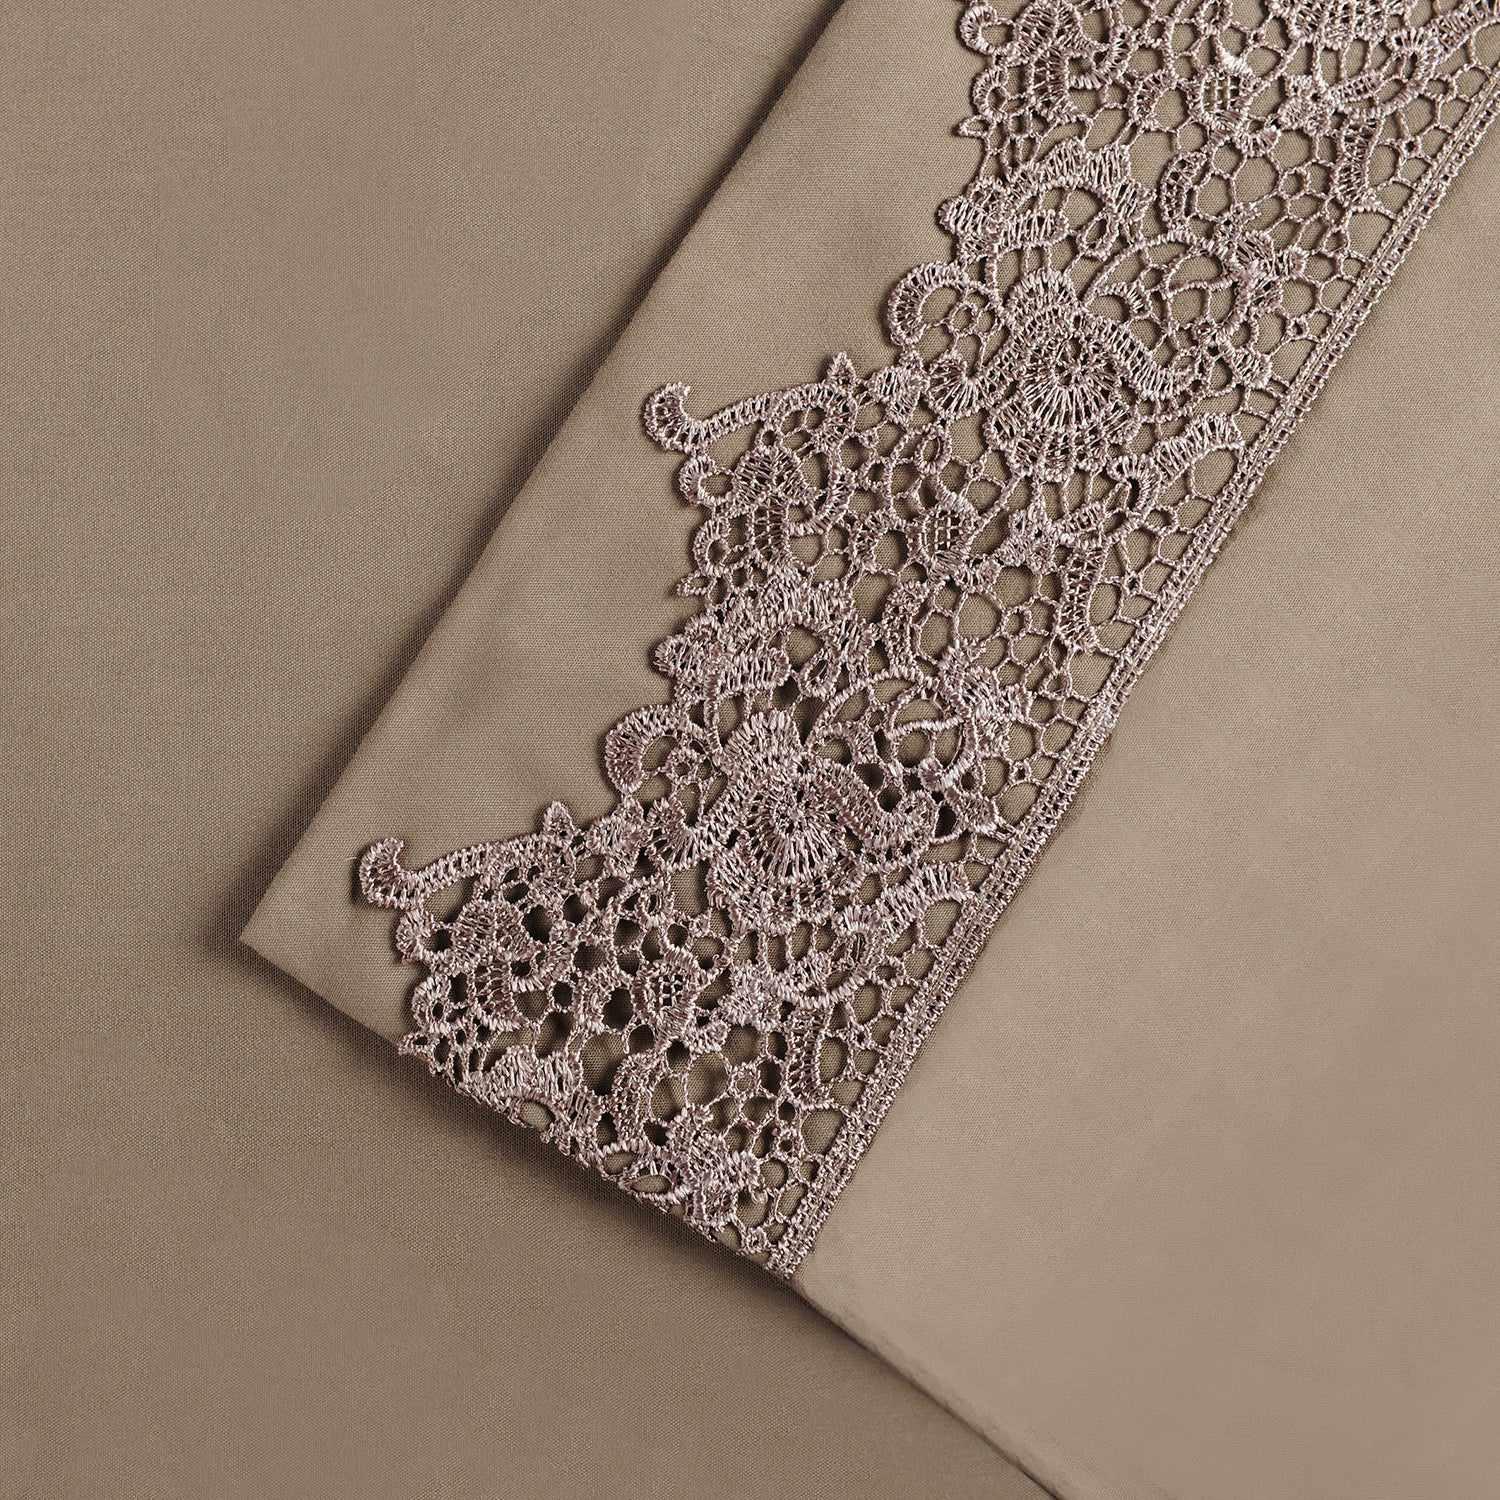 2 Piece Microfiber Lace Embroidery Solid Pillowcase Set - Taupe